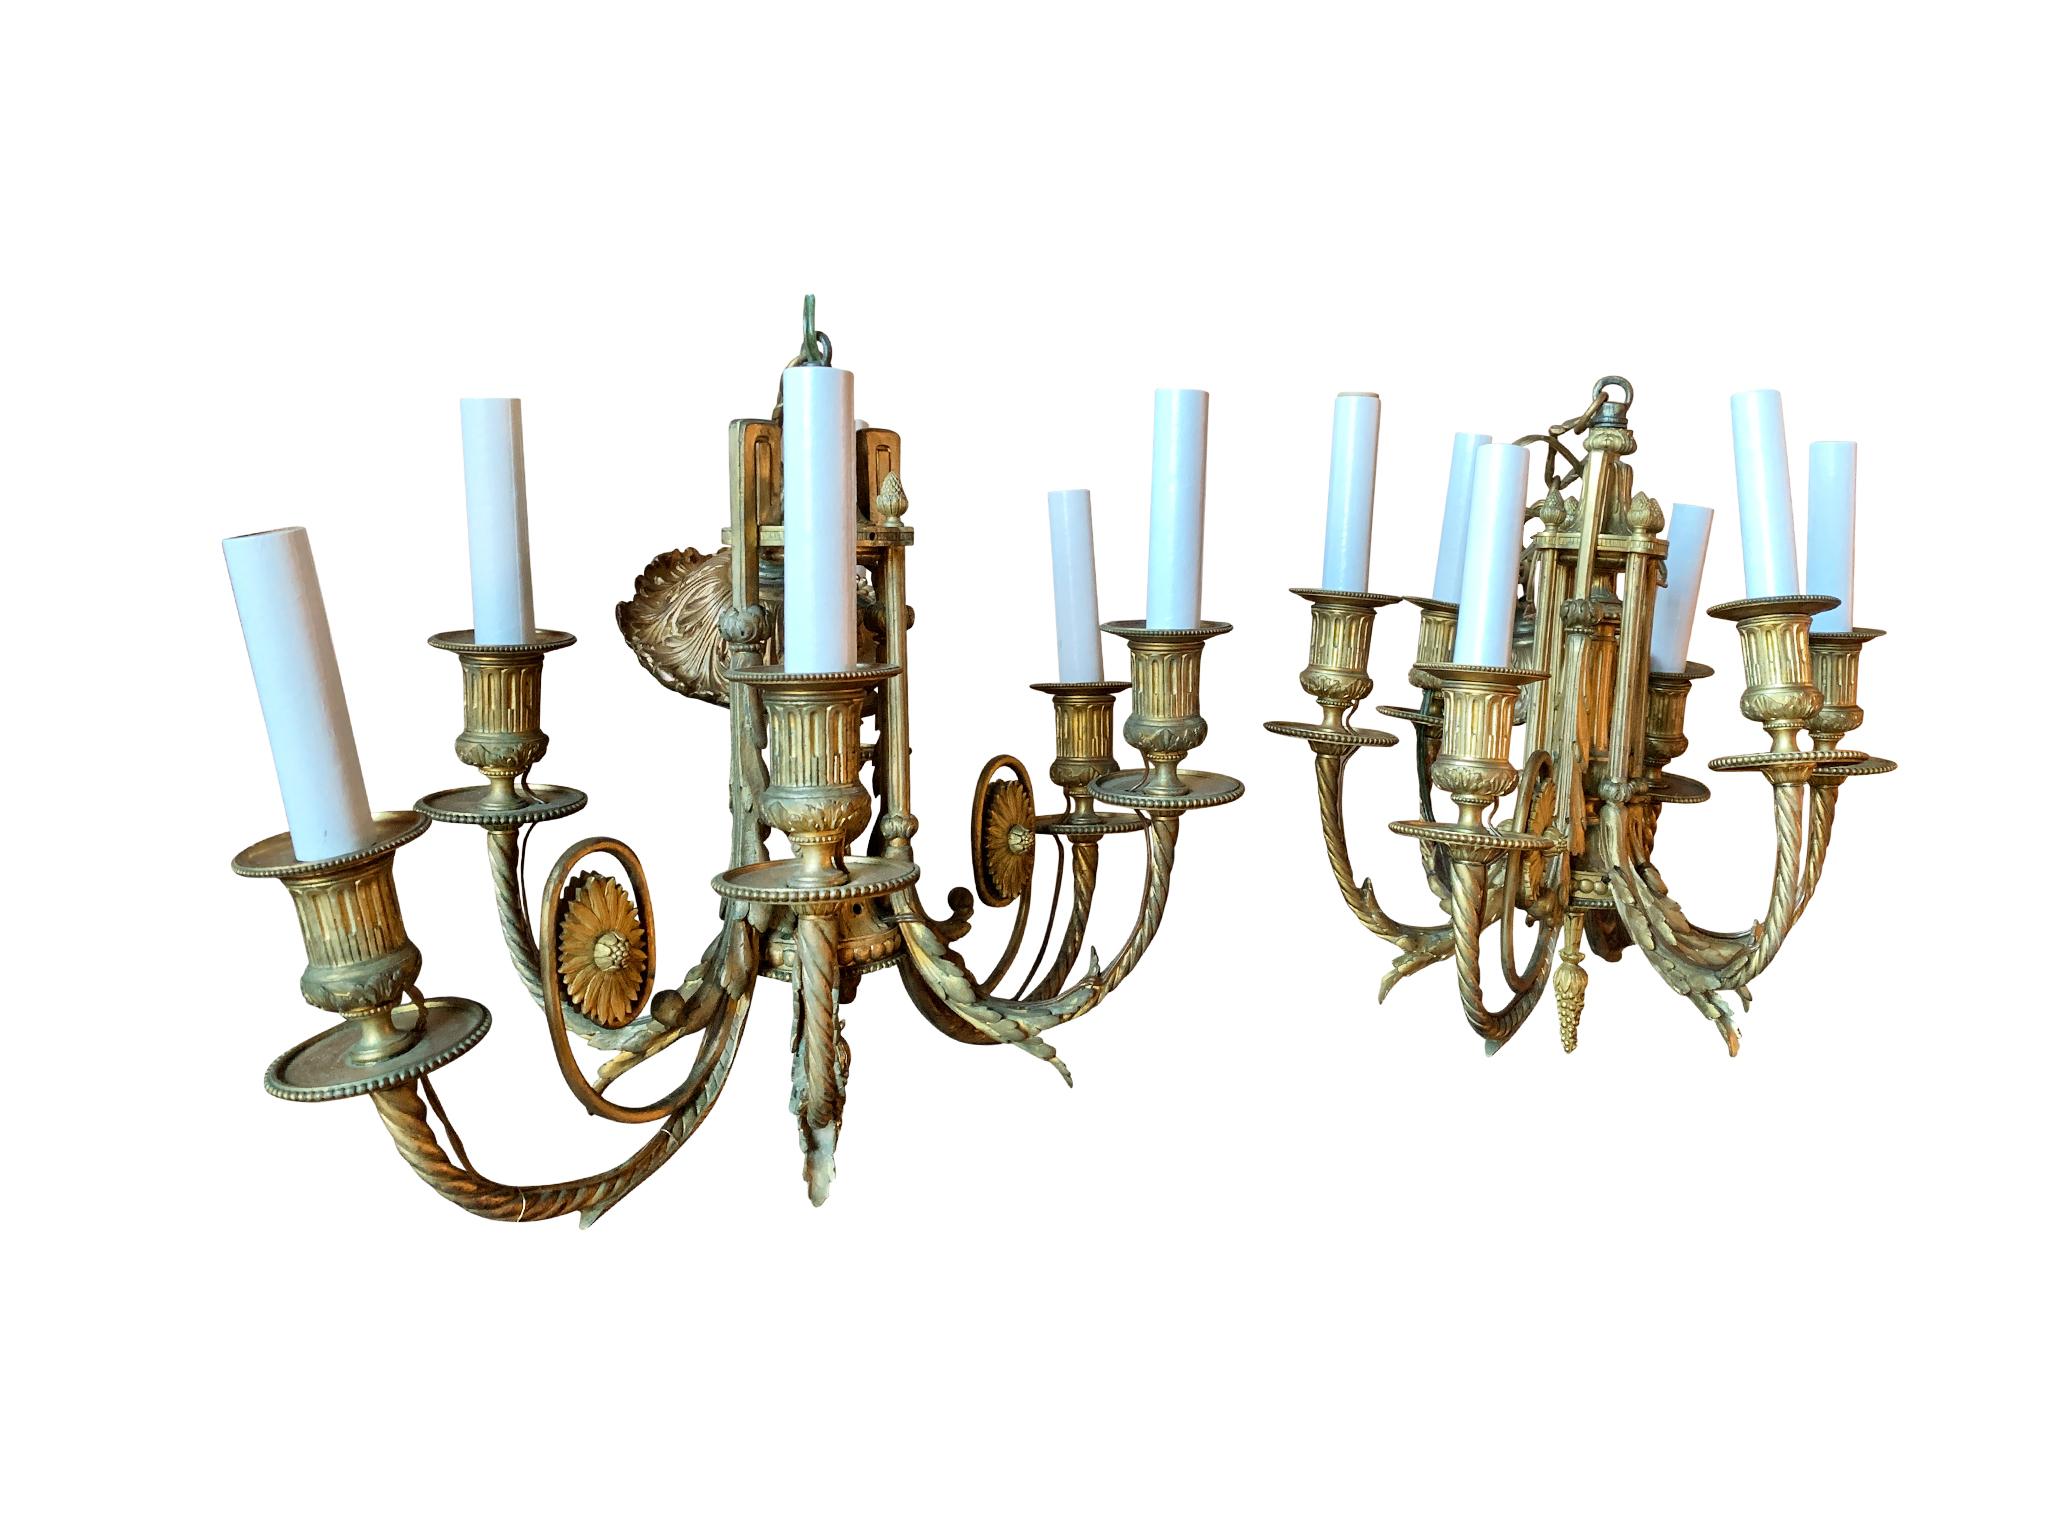 Pair of antique French gilt bronze chandeliers in the Neoclassical style, crafted in the Early 20th Century. Beautiful decorative features include floral and leaf motifs. Each chandelier has 6 candlestick style bulb sockets. They are newly rewired